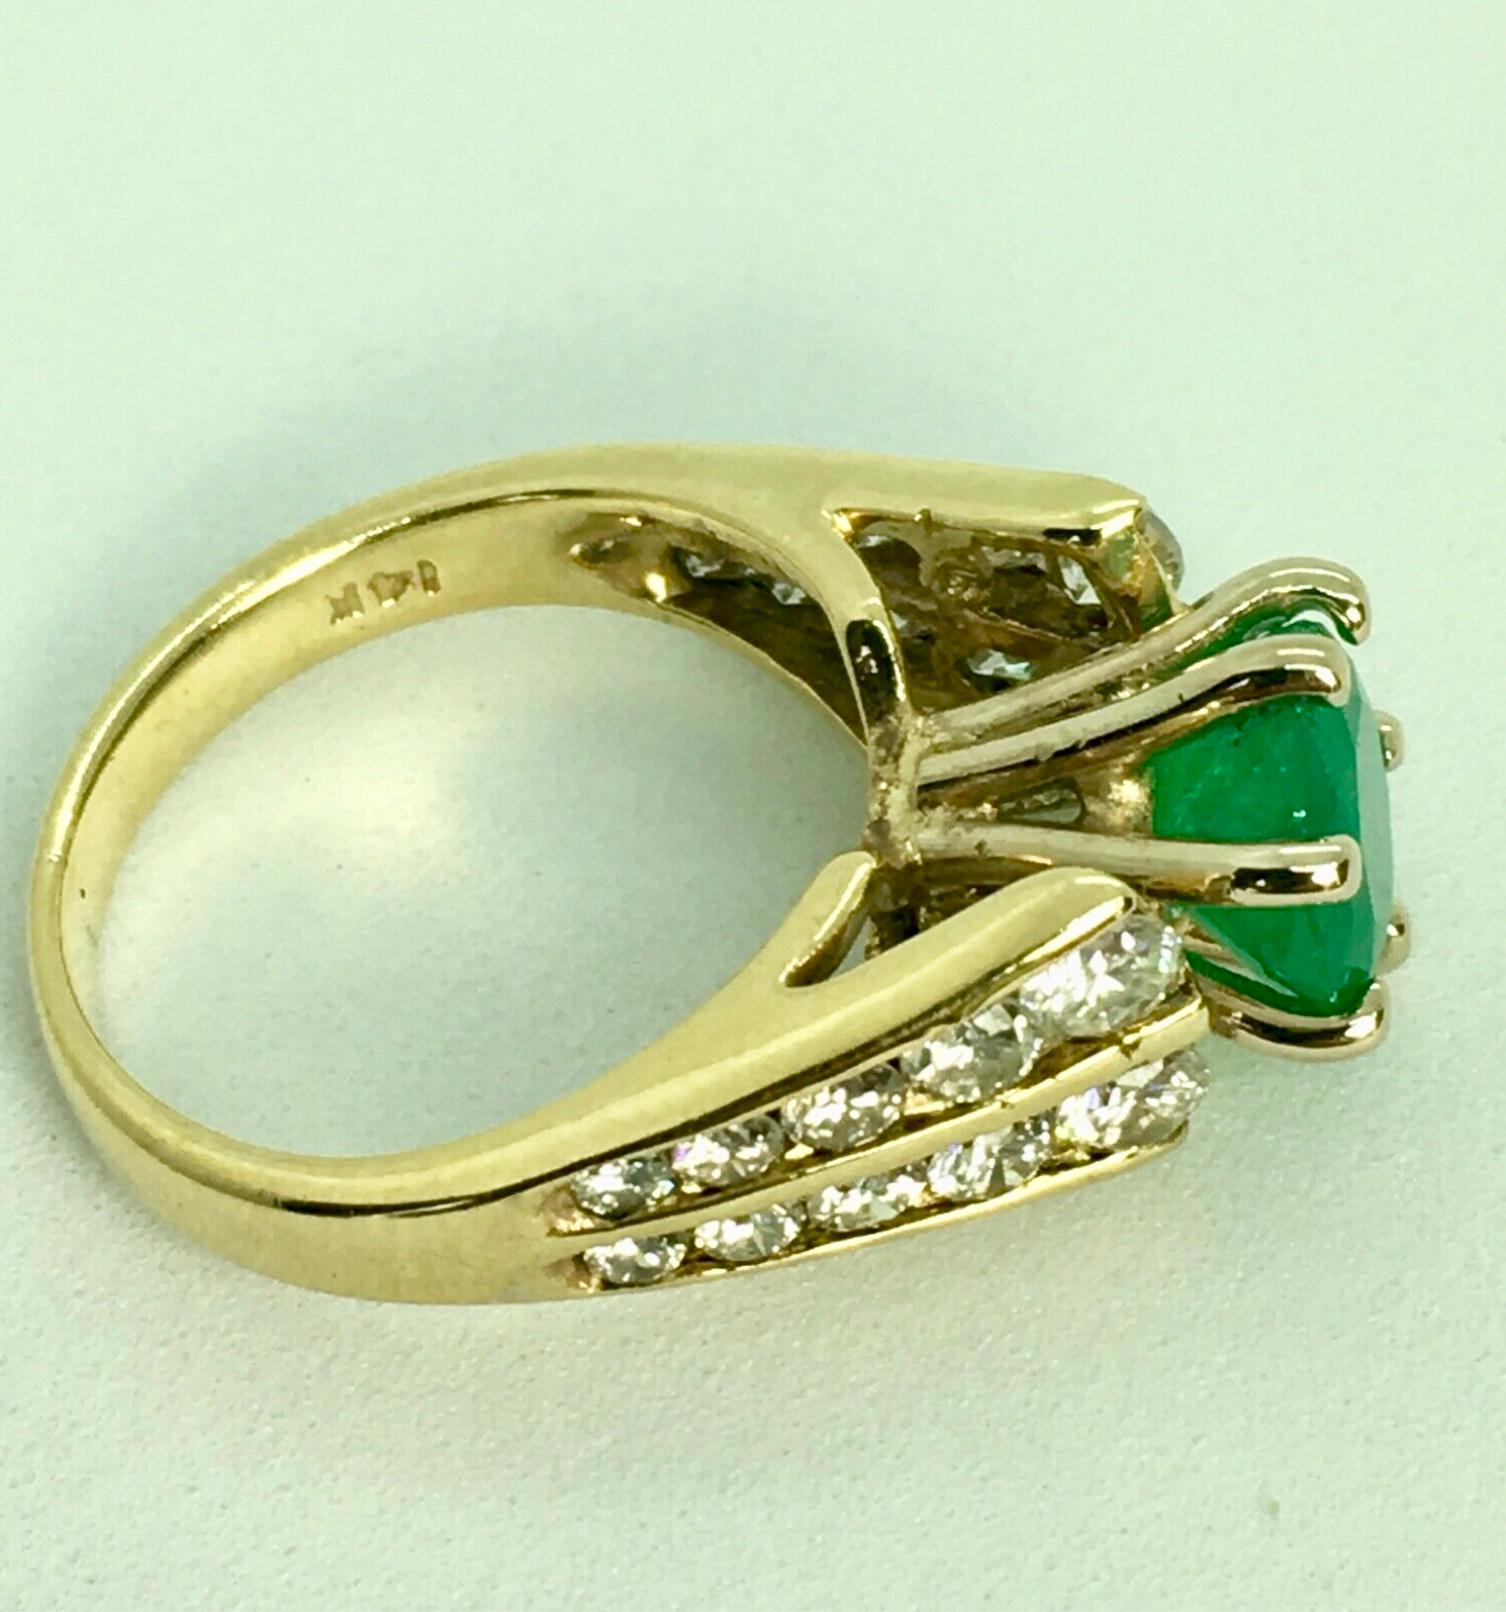 Stunning Estate 2.50 Carats Natural Colombian Emerald Solitaire Ring Diamond Accents
Shape or Cut: Round 
Emerald Weight: 1.50 Carats (1 emerald) 
Color: Natural FINE Medium Green 
Accent Stones: Diamond G-VS-SI1  Approx 1.0 Carat
This gorgeous